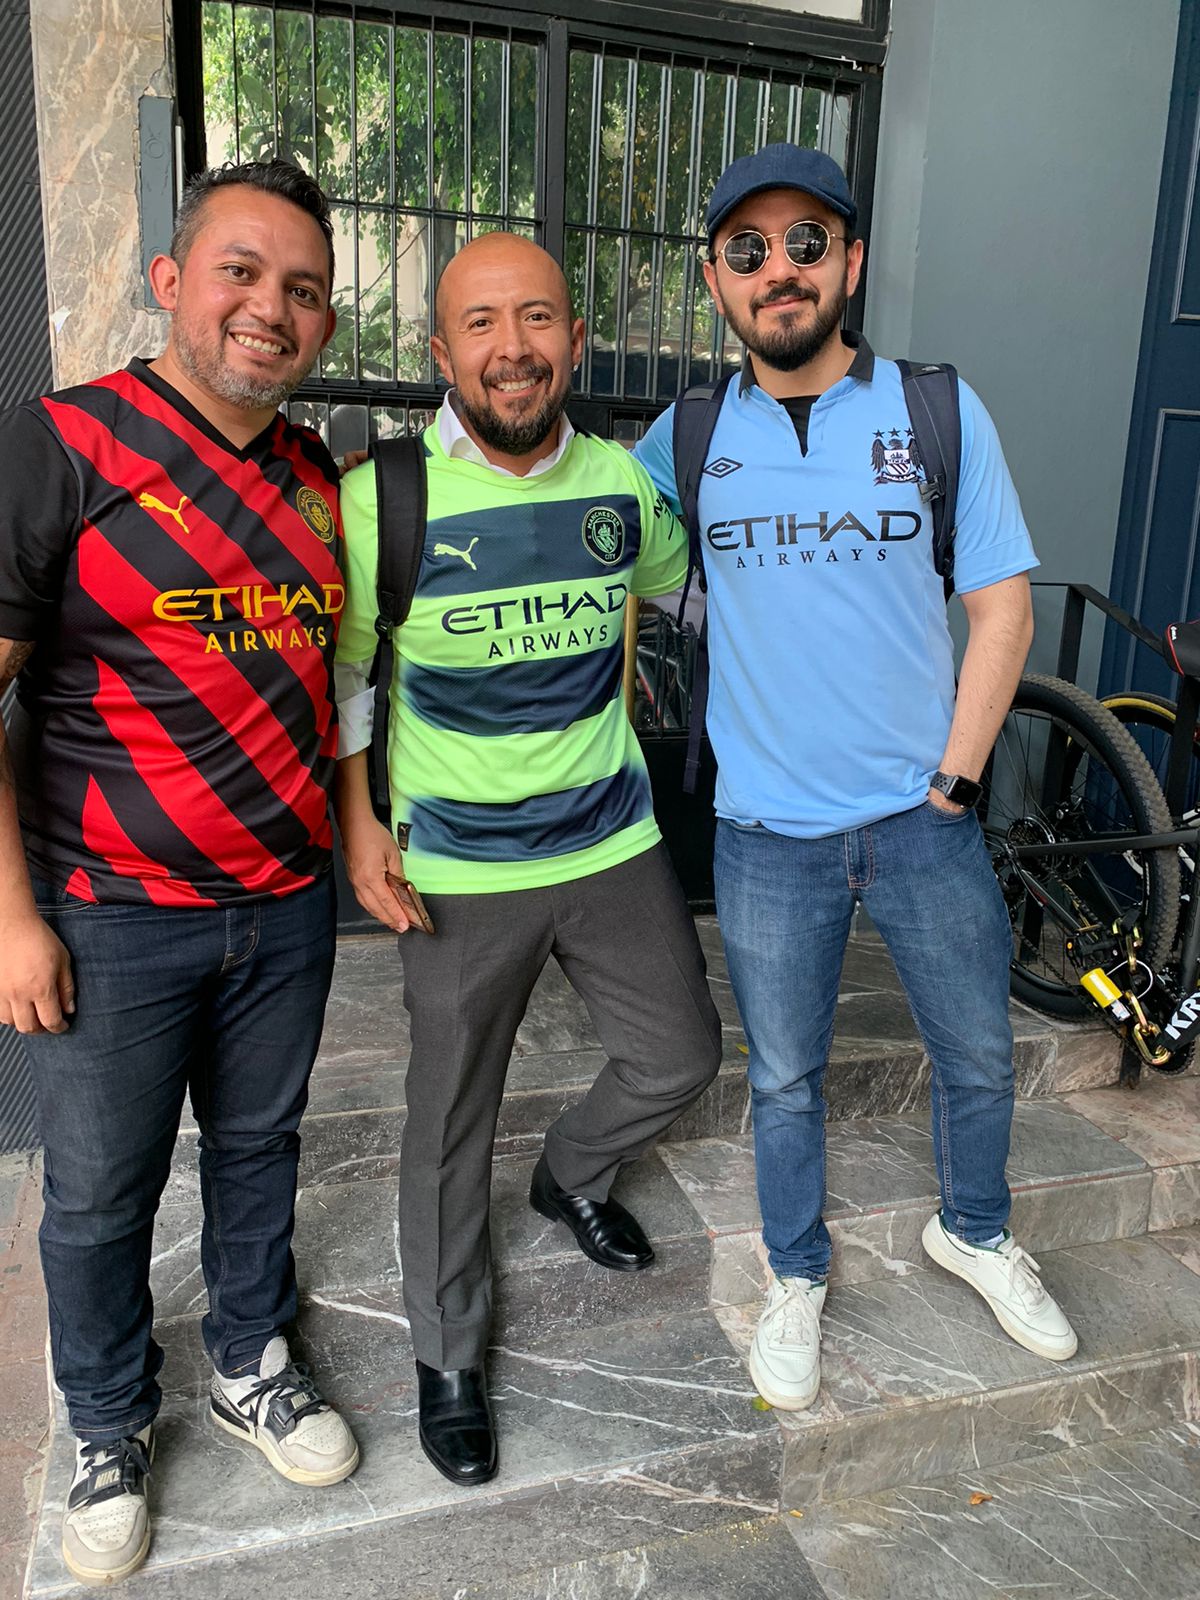 With everything and godin attire, the ManCity fans arrived